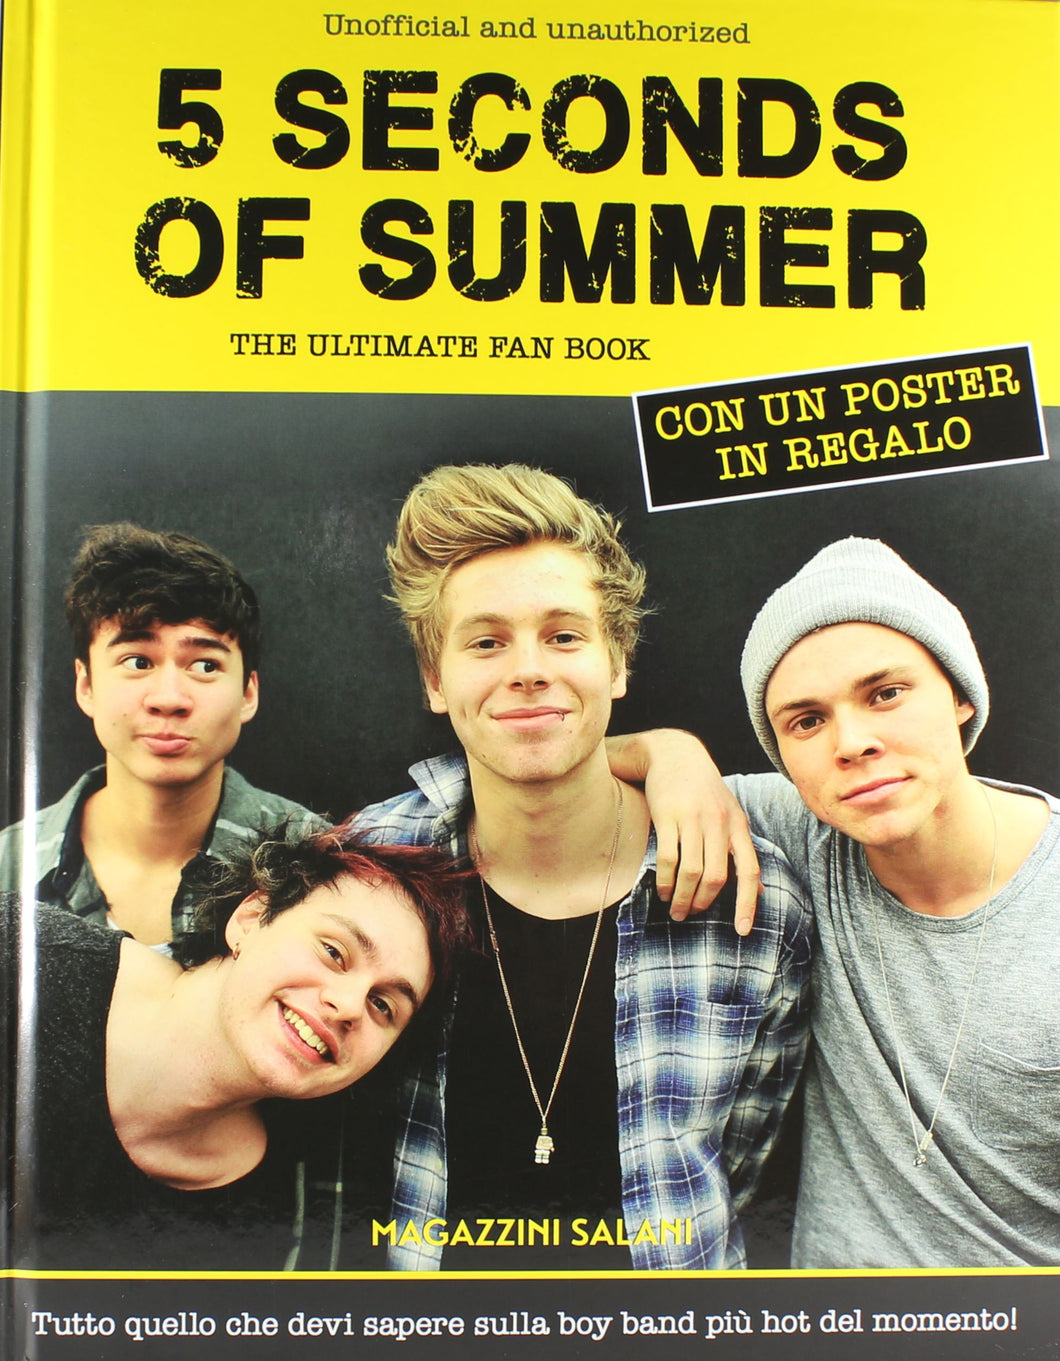 Libro 5 Seconds of Summer - The Ultimate Fan Book